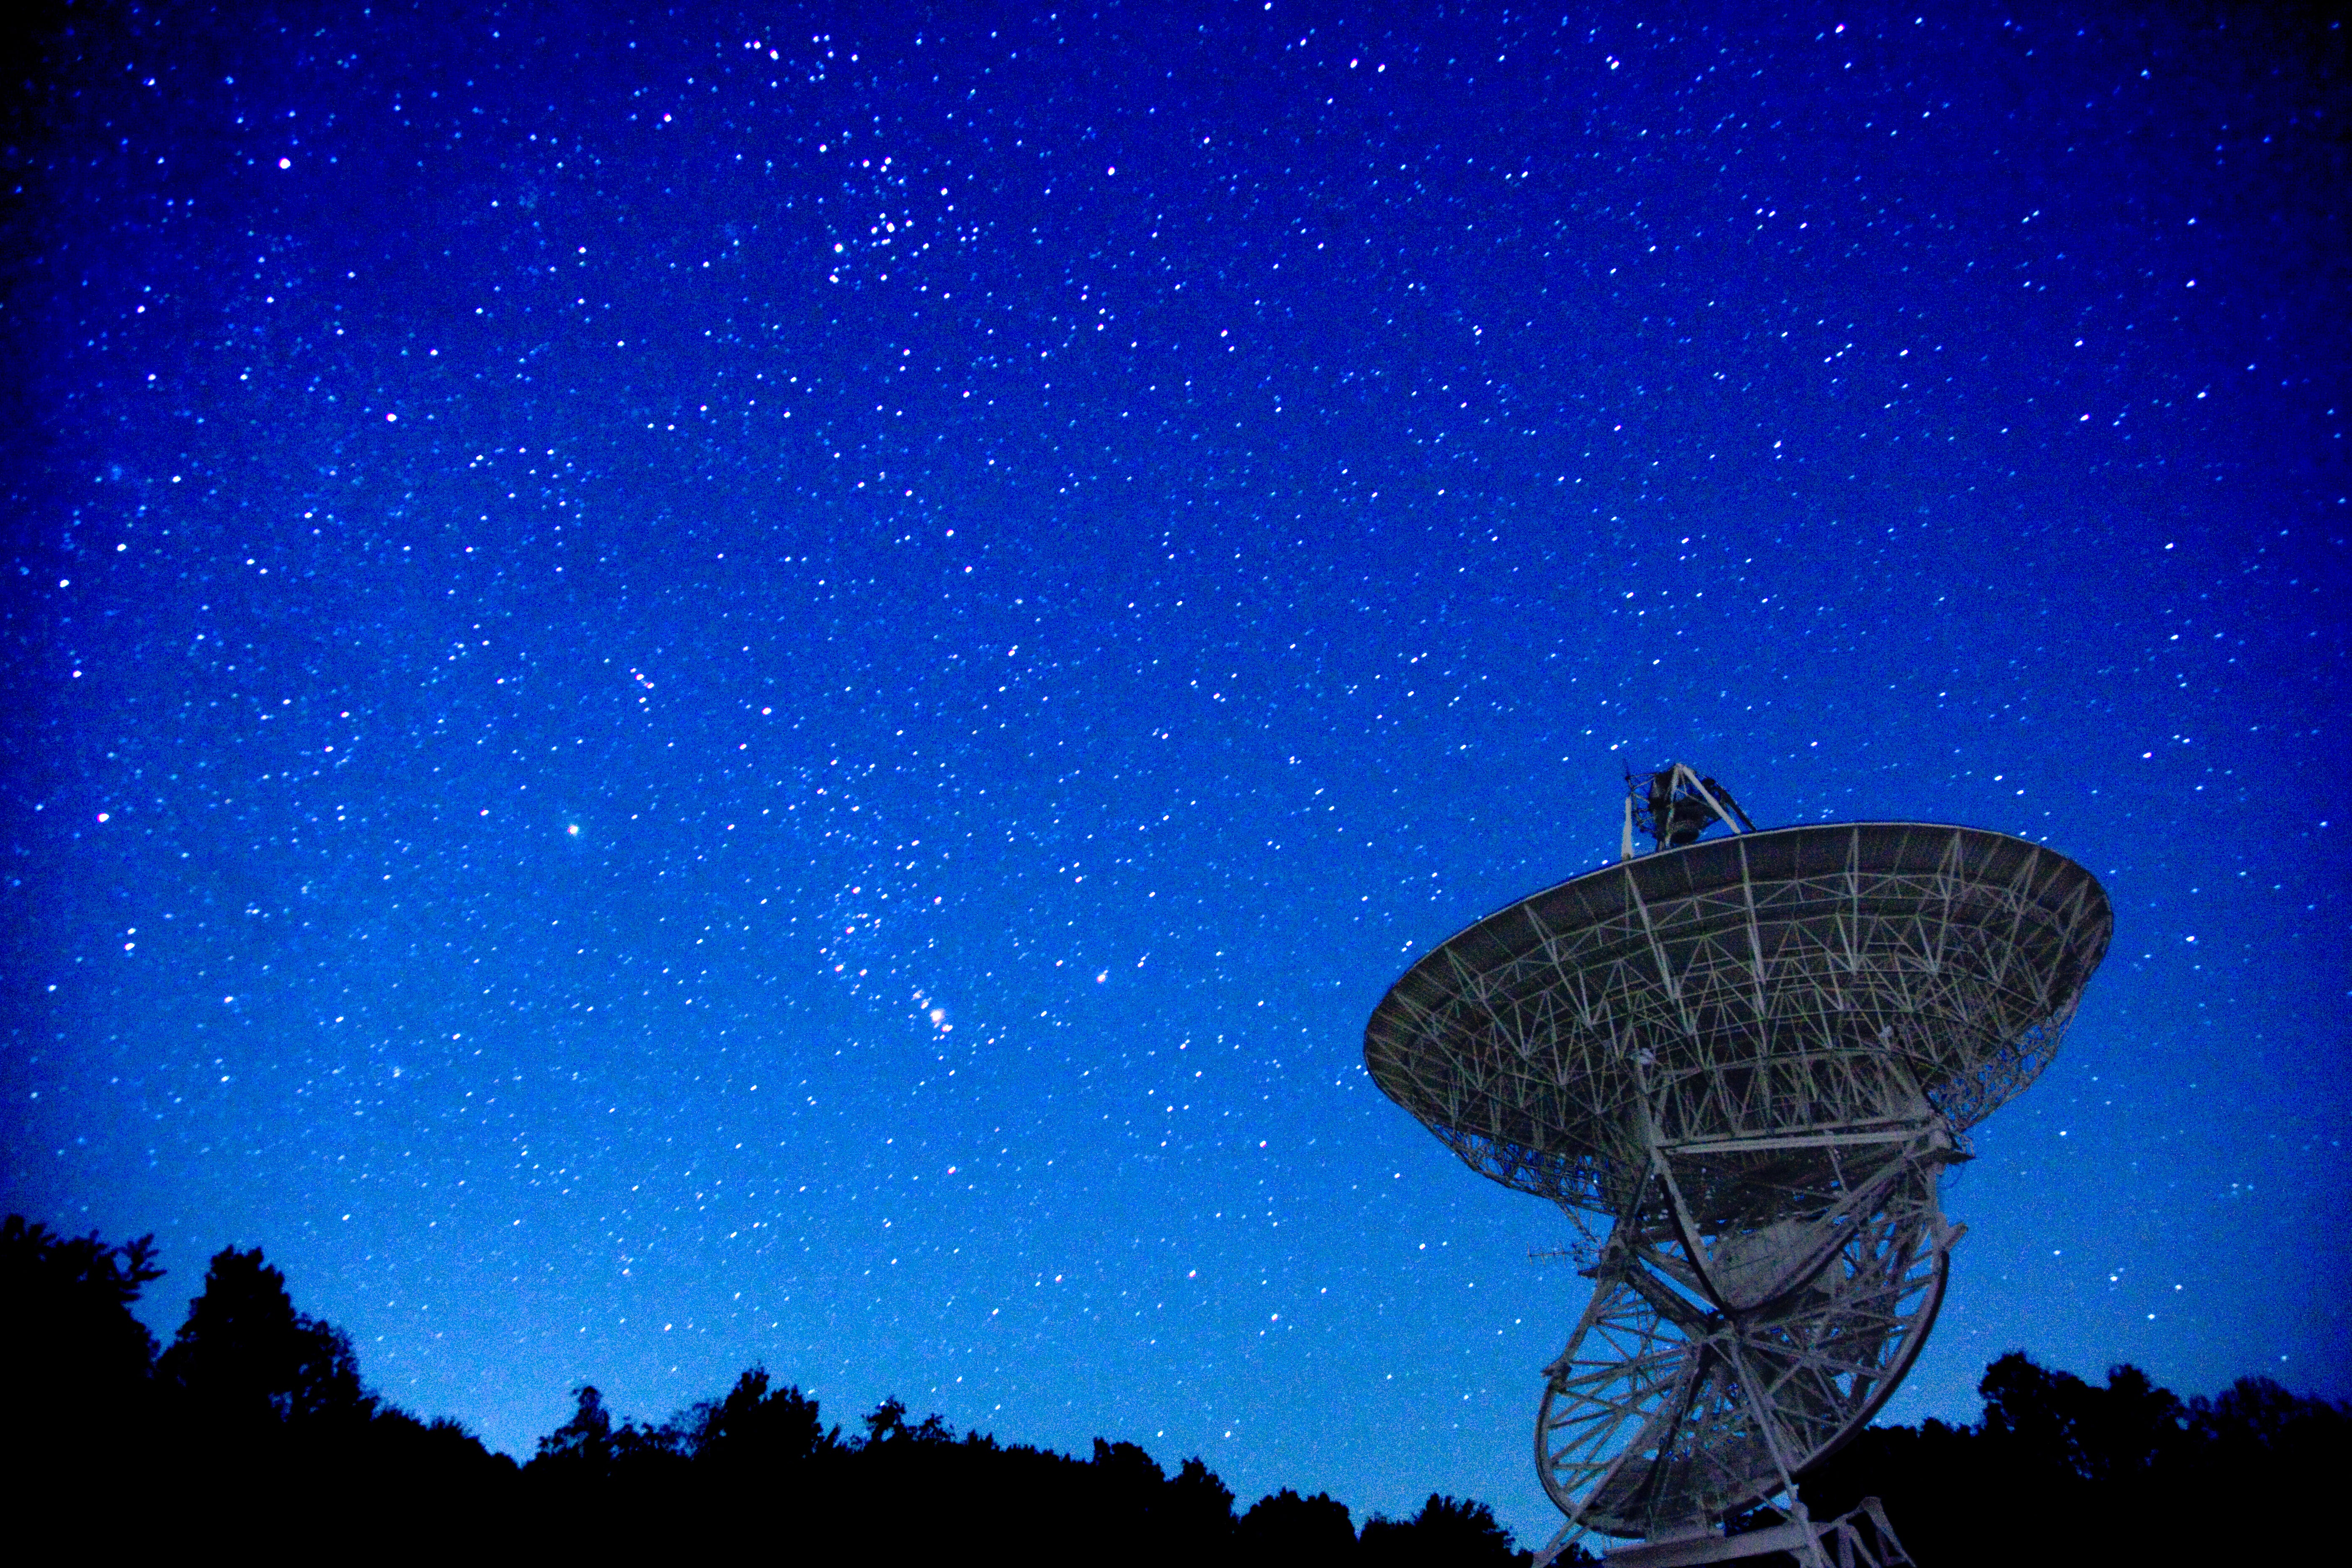 The Search for Extraterrestrial Intelligence or SETI network listens for signs of radio broadcasts from alien civilizations